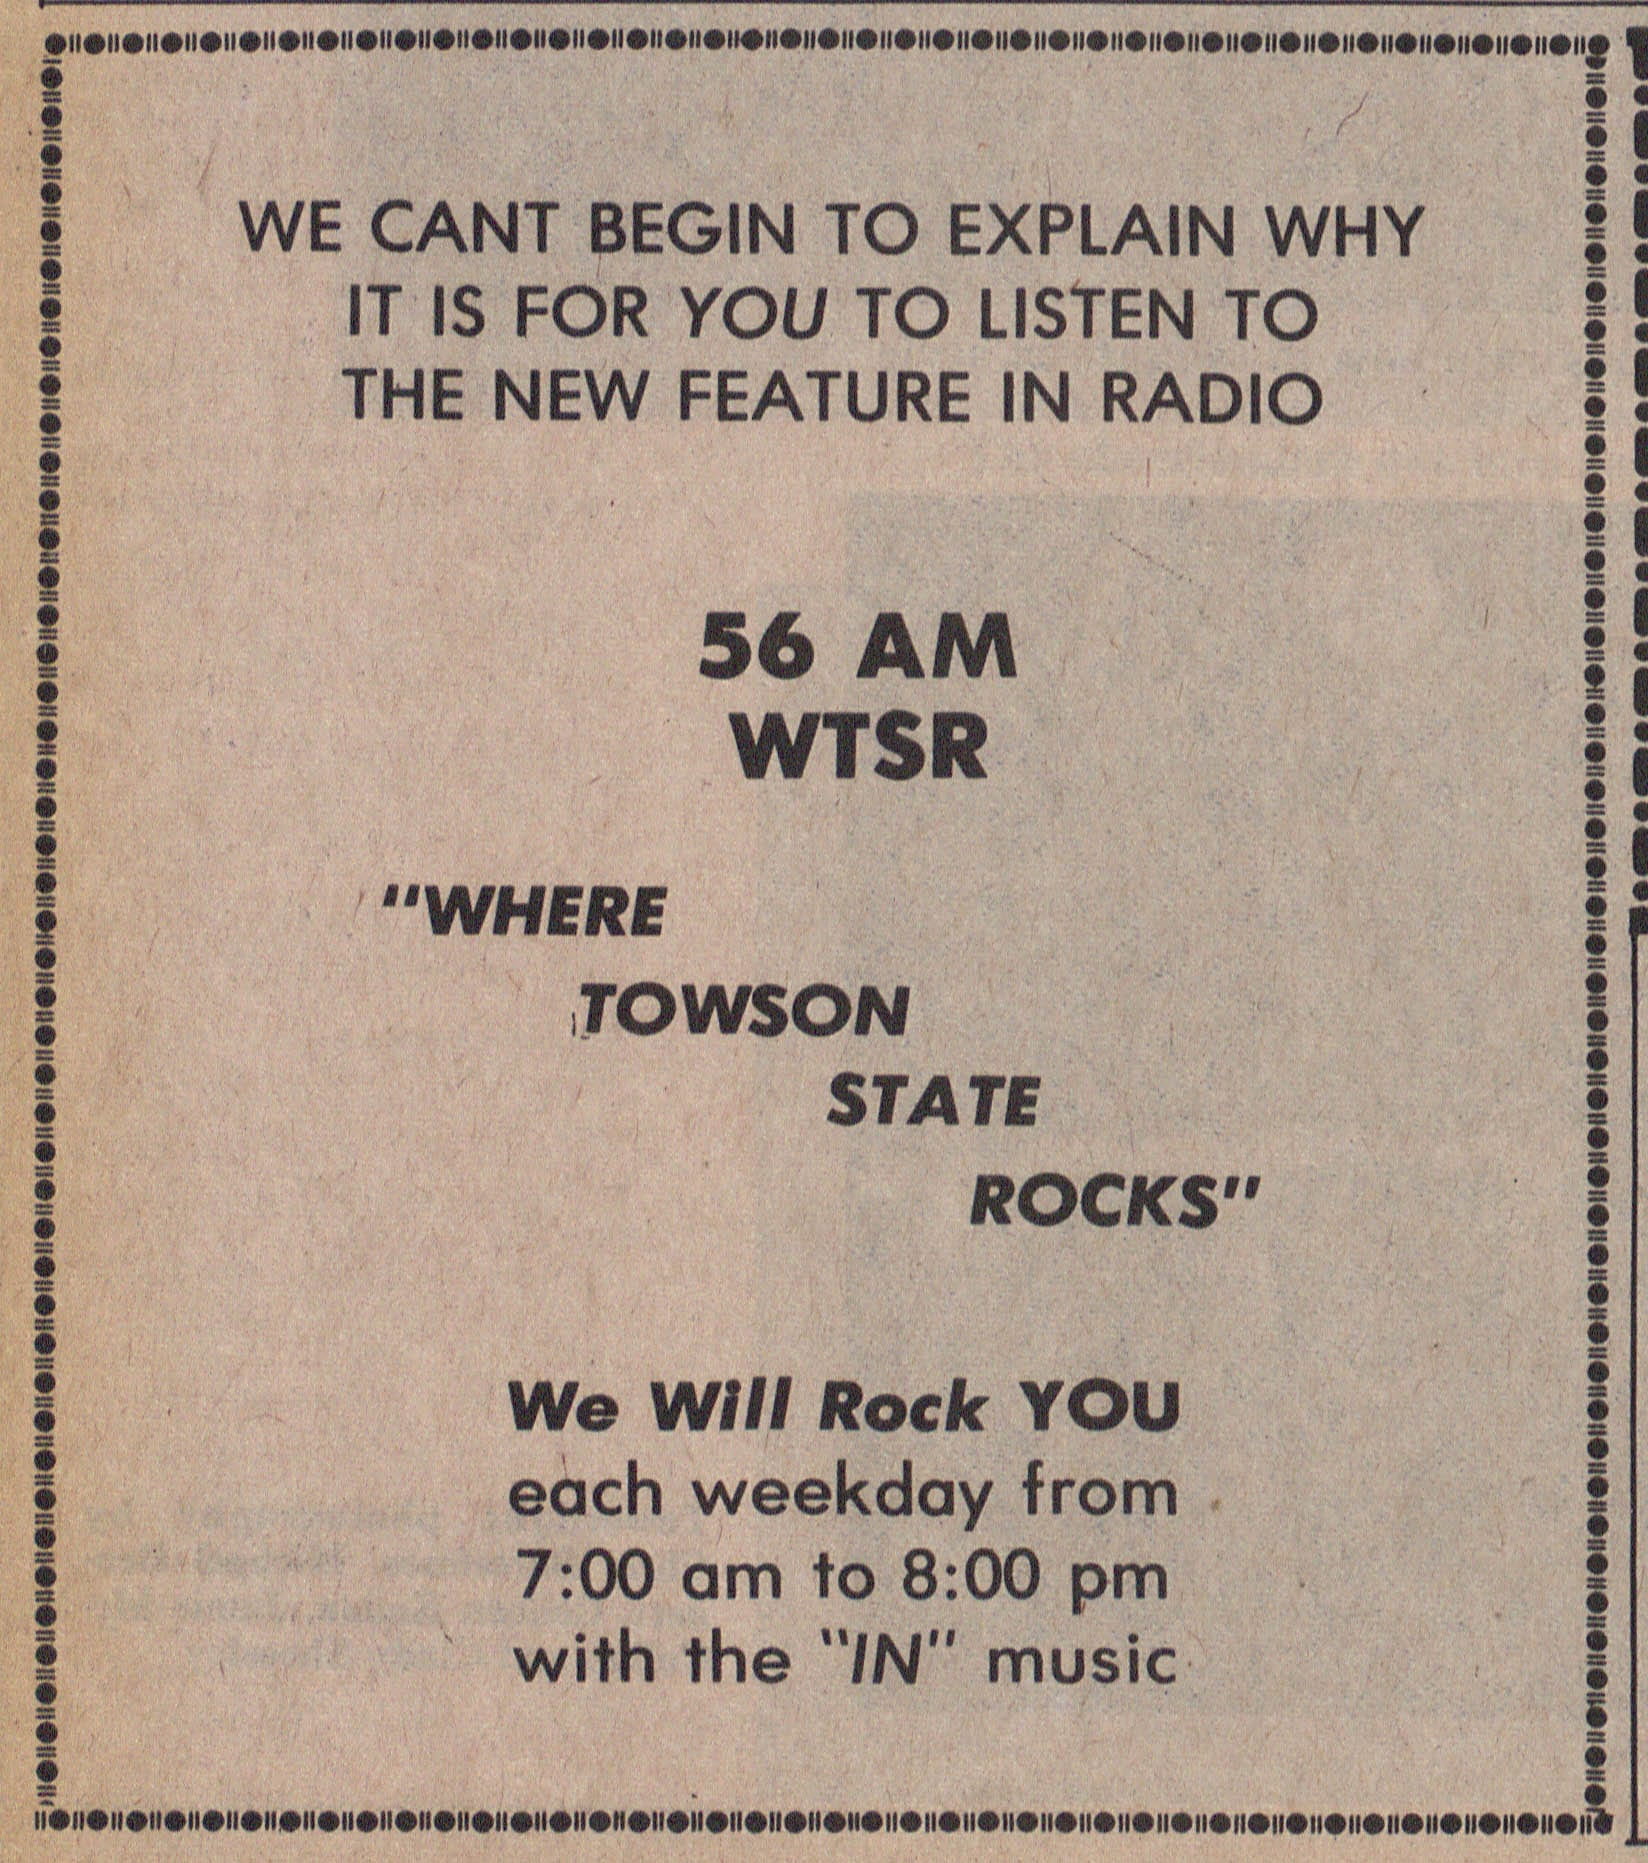 Ad reads: We can't begin to explain why it is for you to listen to the new feature in radio 56 AM WTSR "Where Towson State Rocks" We Will Rock YOU each weekday from 7:00am to 8:00pm with the "IN" music